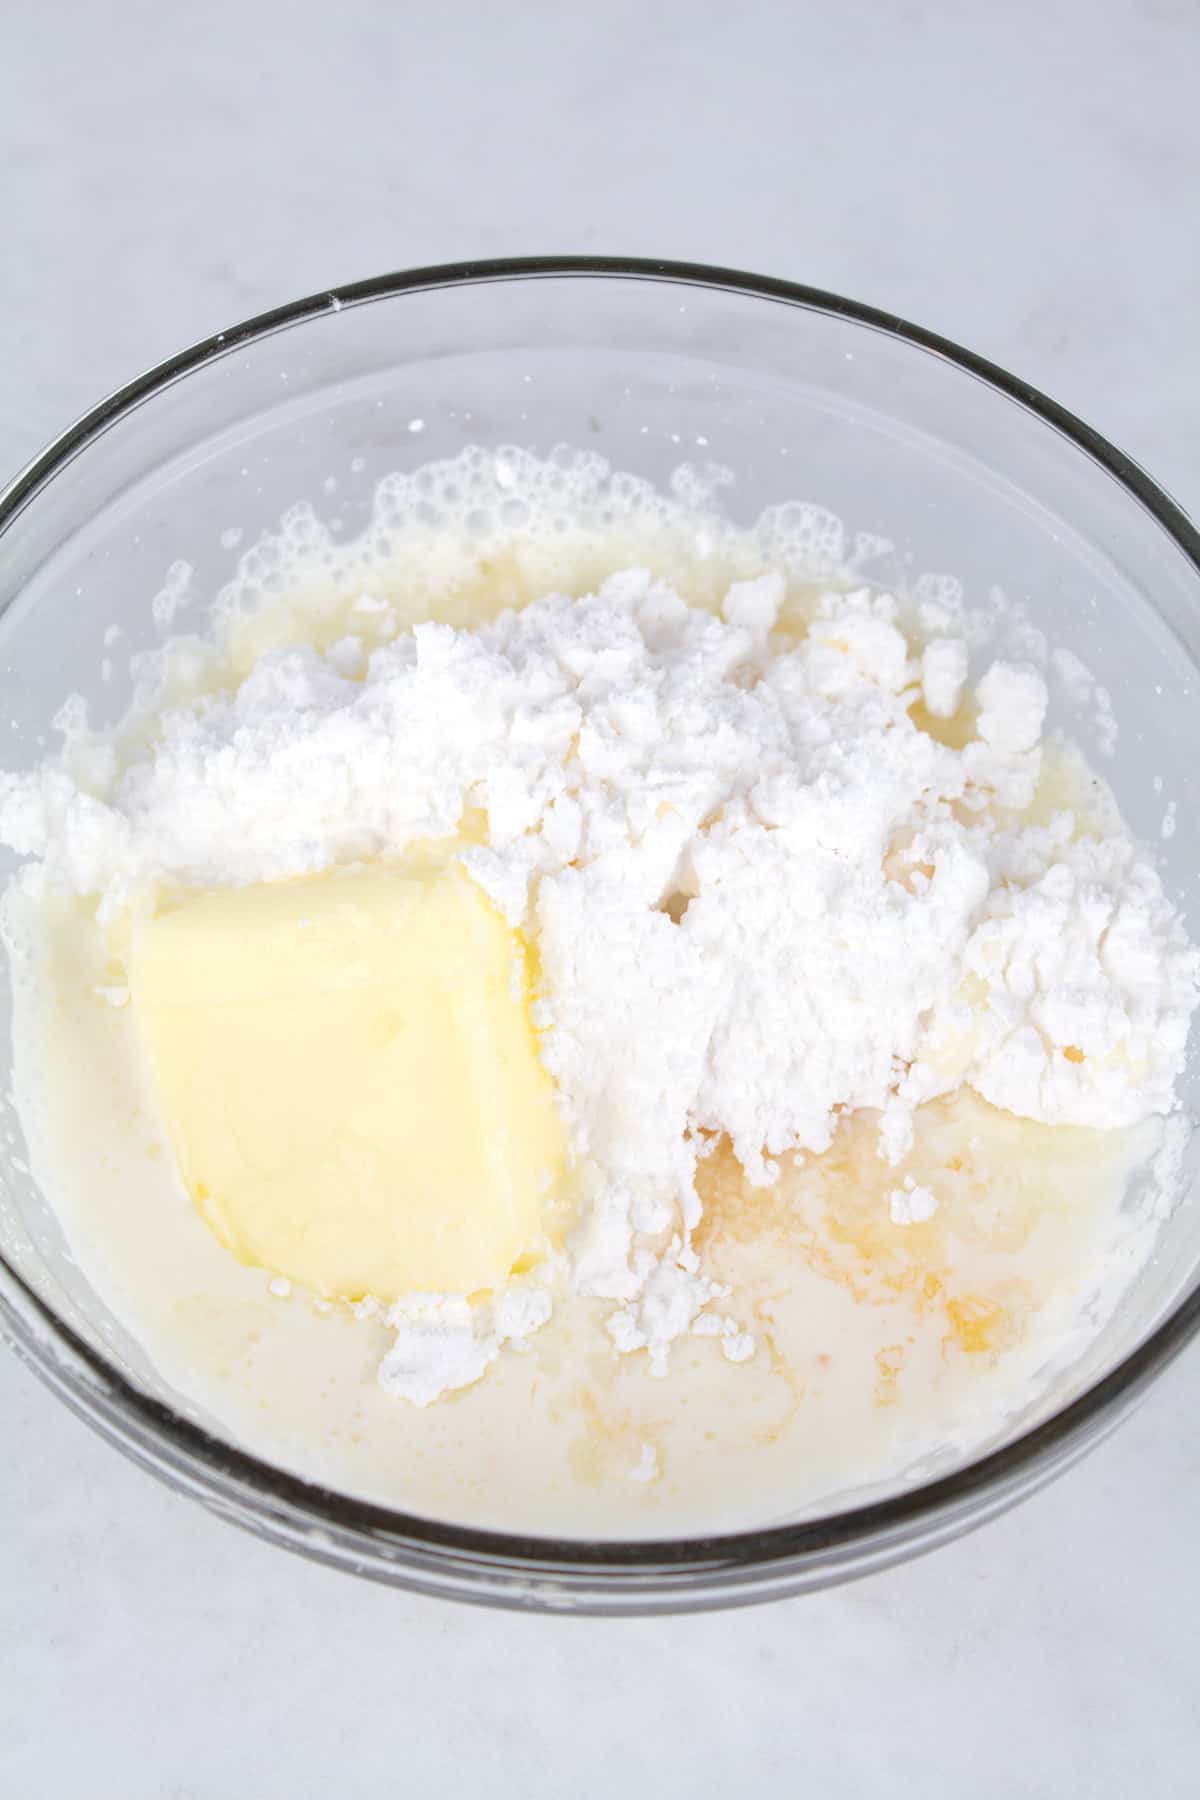 Ingredients for orange icing in a glass bowl.